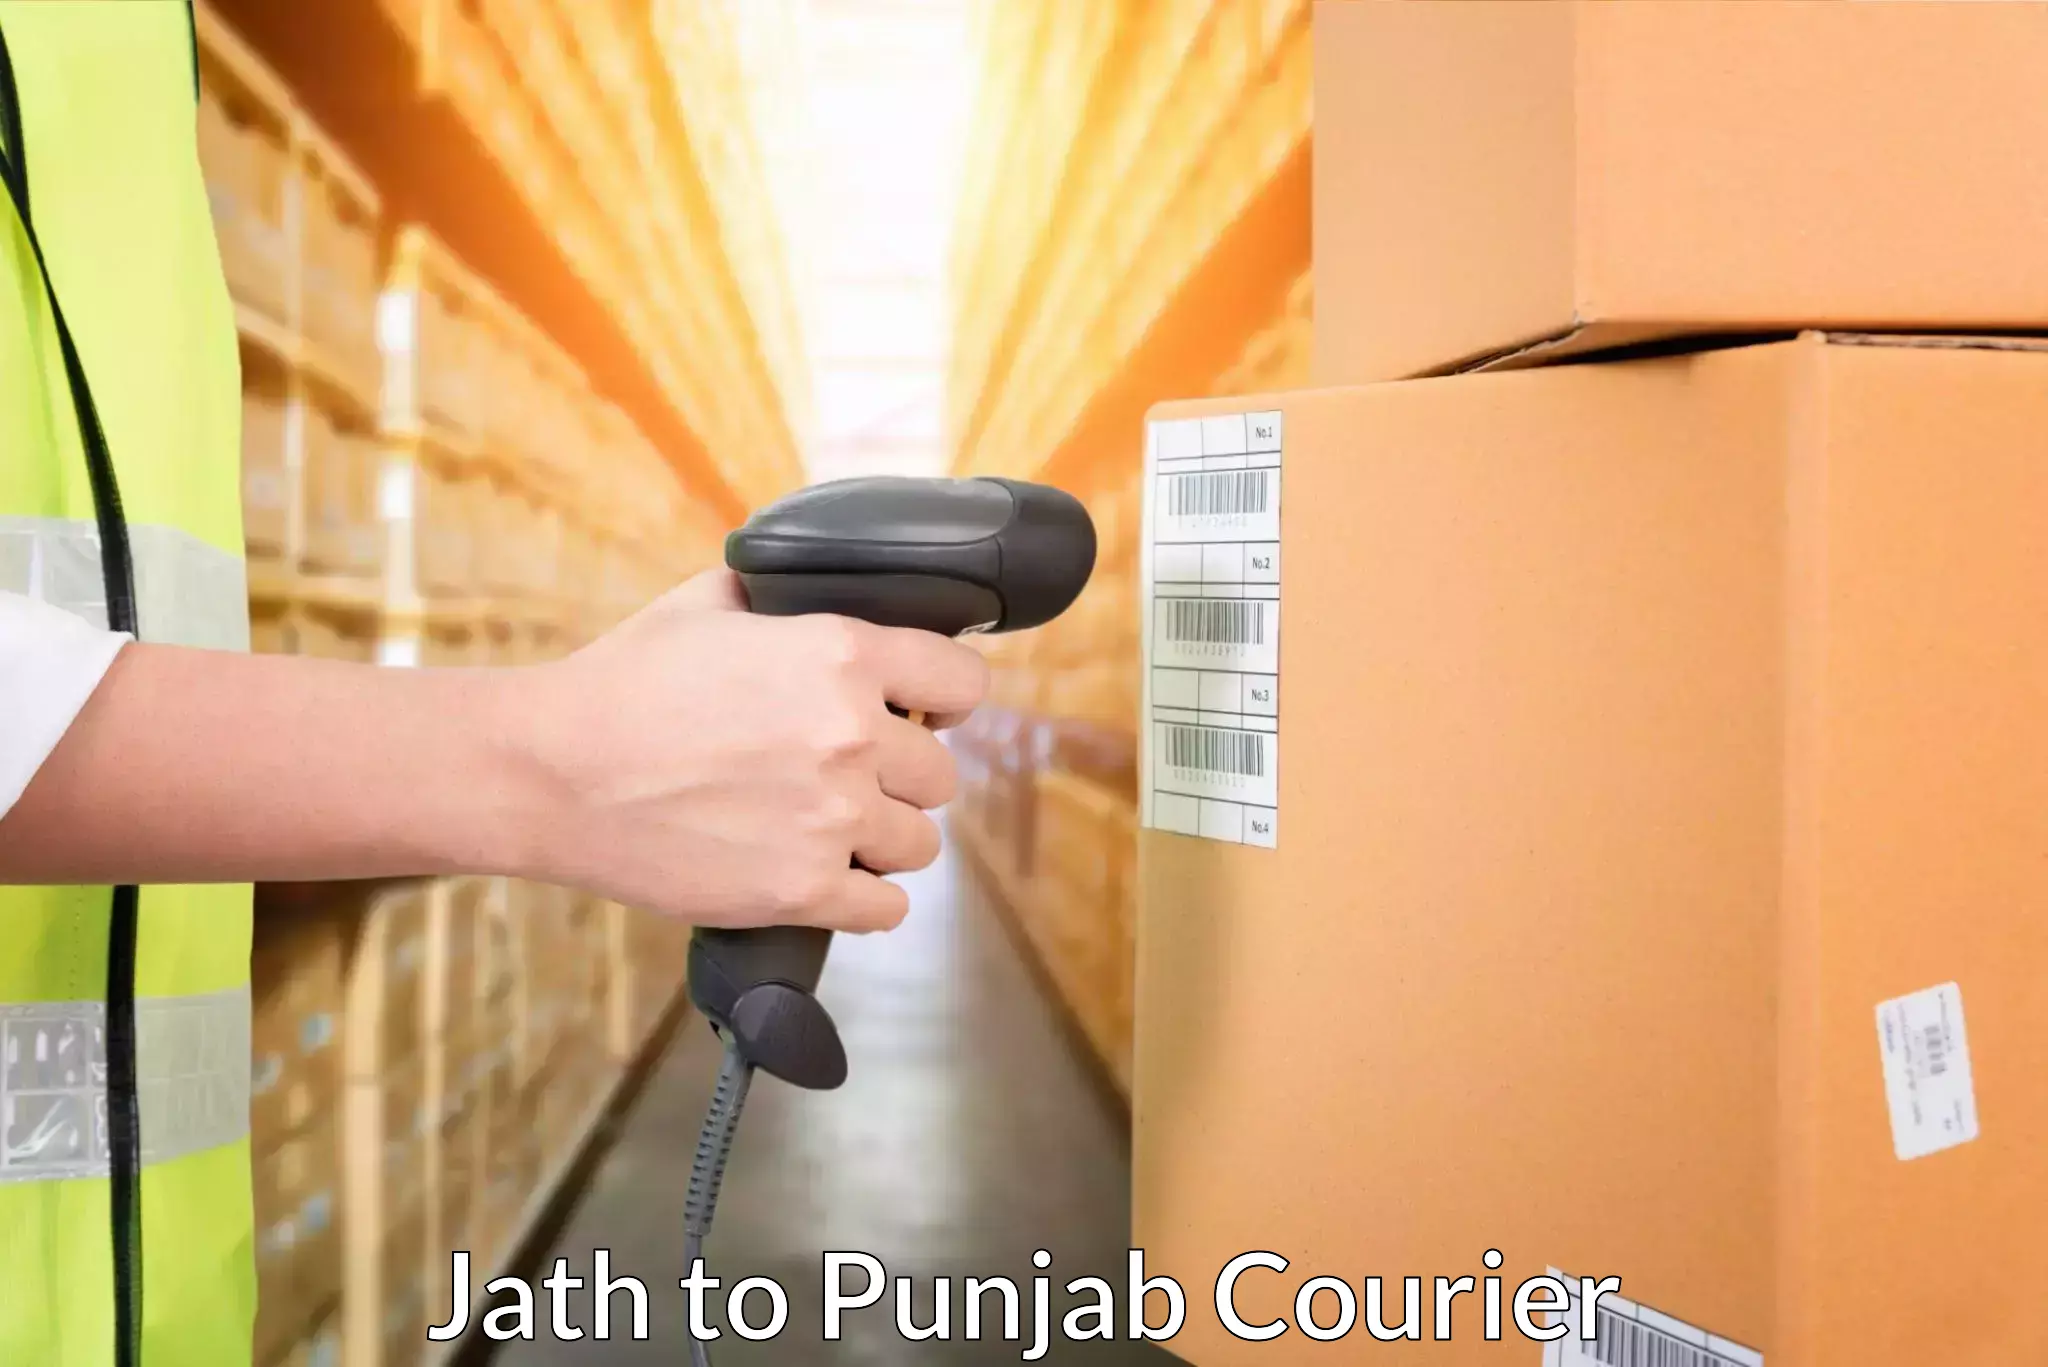 Full-service courier options Jath to Ajnala